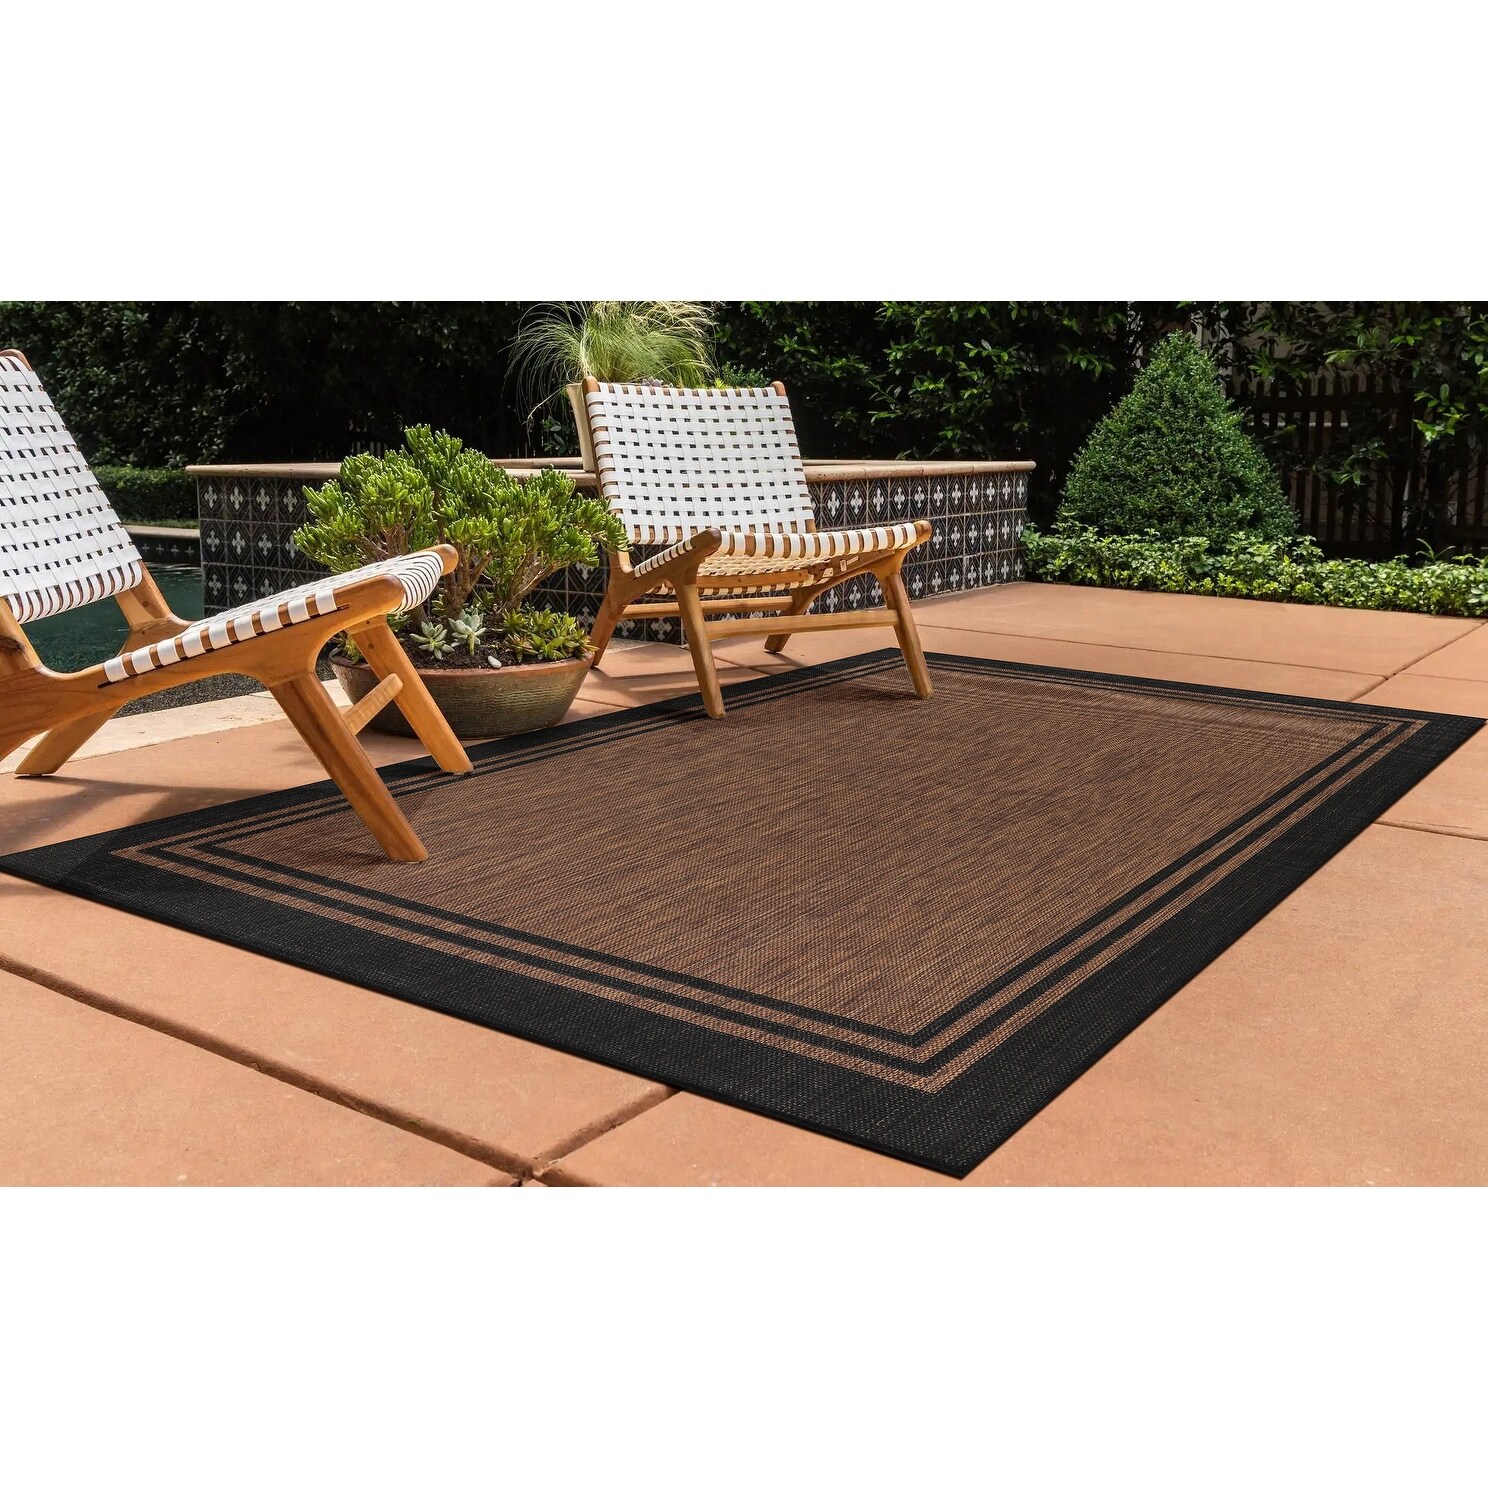 https://ak1.ostkcdn.com/images/products/is/images/direct/a234907e15dfb718372785b2e4717c87a1e978d3/Washable-Bordered-Indoor-Outdoor-Rug%2C-Outside-Carpet-for-Patio%2C-Deck%2C-Porch.jpg